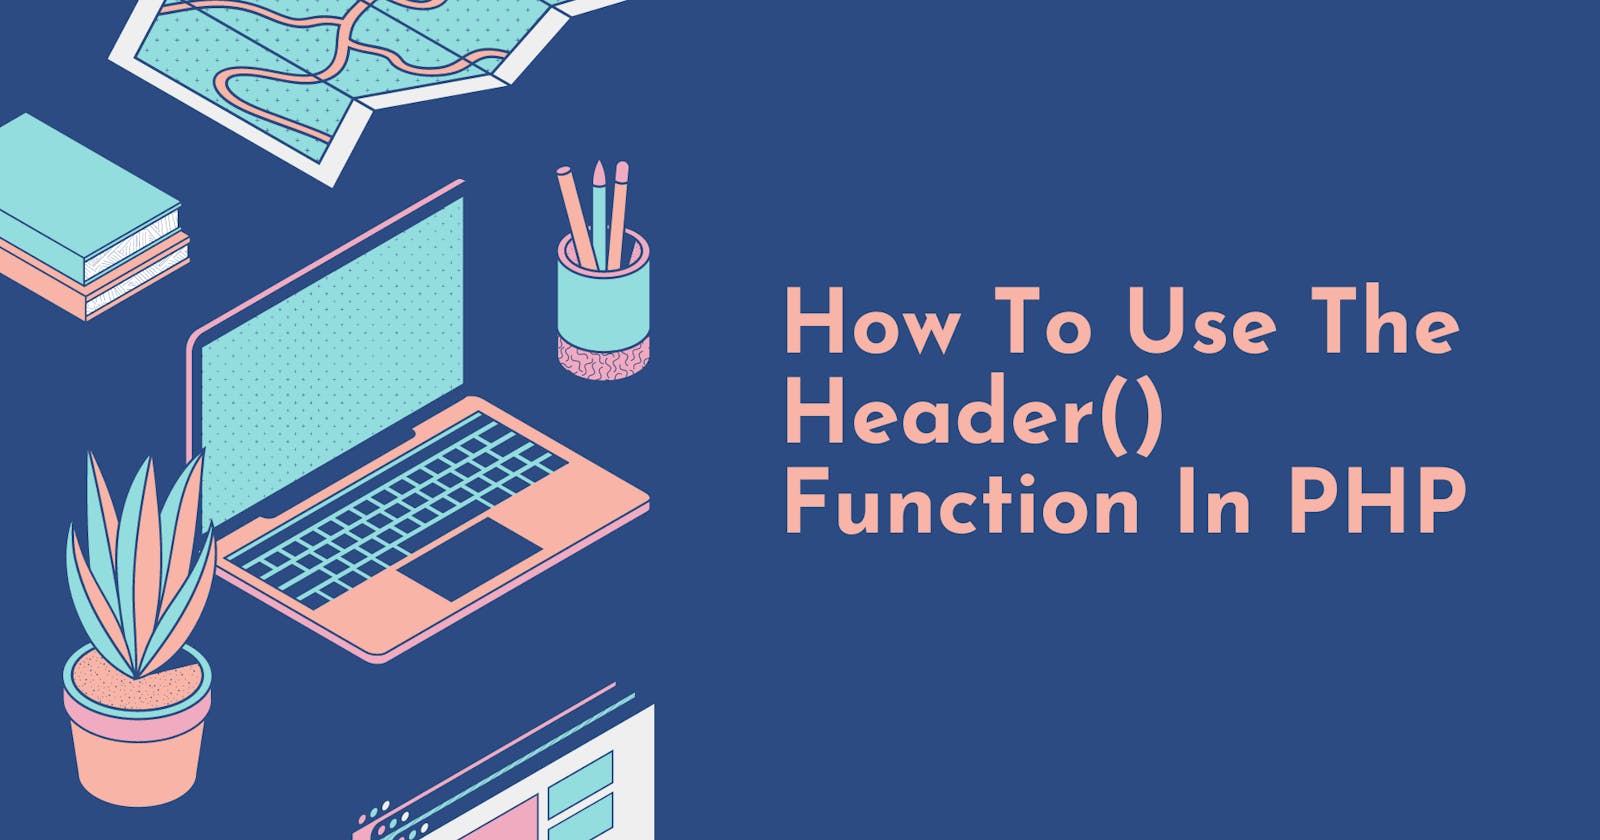 How To Use The Header() Function In PHP